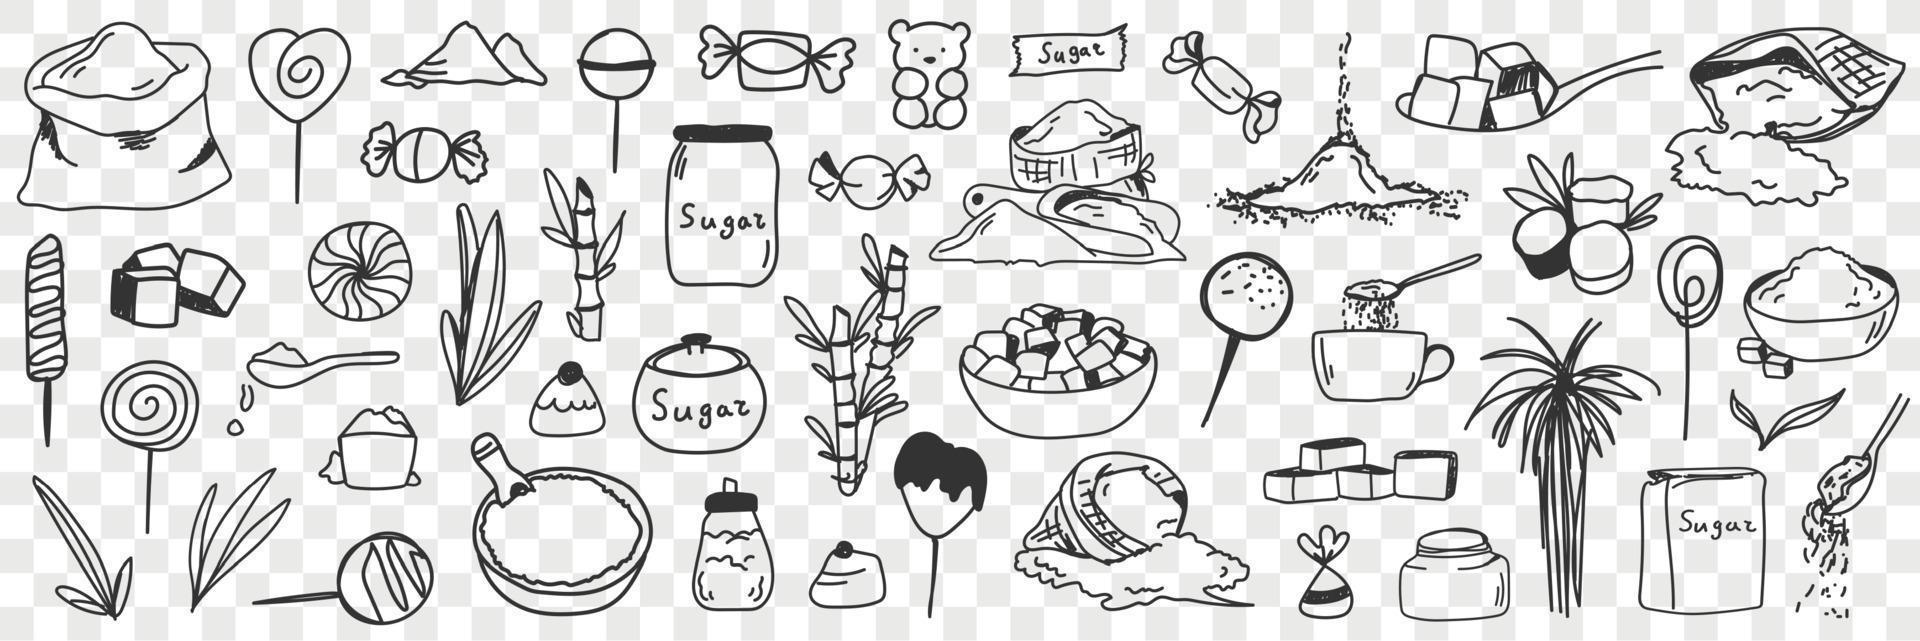 Sugar and ingredients for candies doodle set. Collection of hand drawn edible sweet sugar flour plants for making cooking candies or sweets desserts isolated on transparent background vector